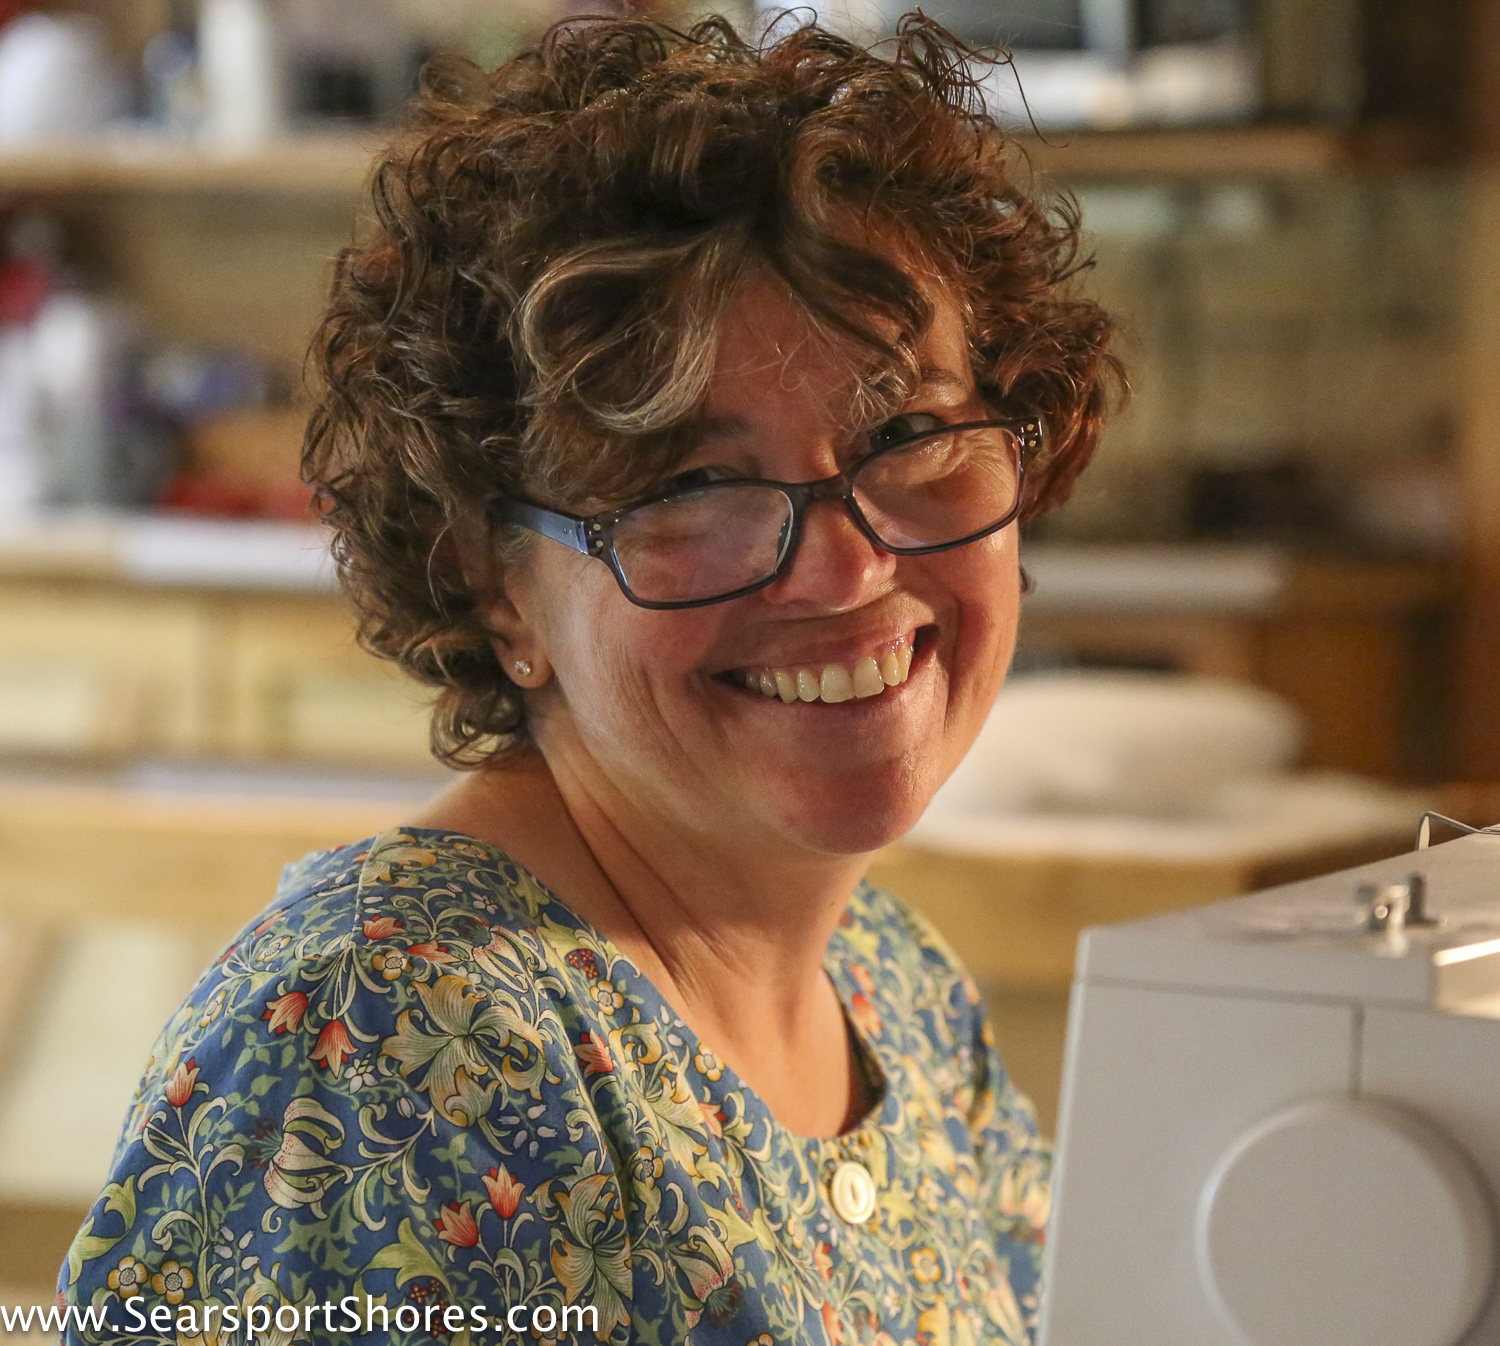 Ellen Mason “The Humble Stitch” Artist-in-Residence July 26 – August 1